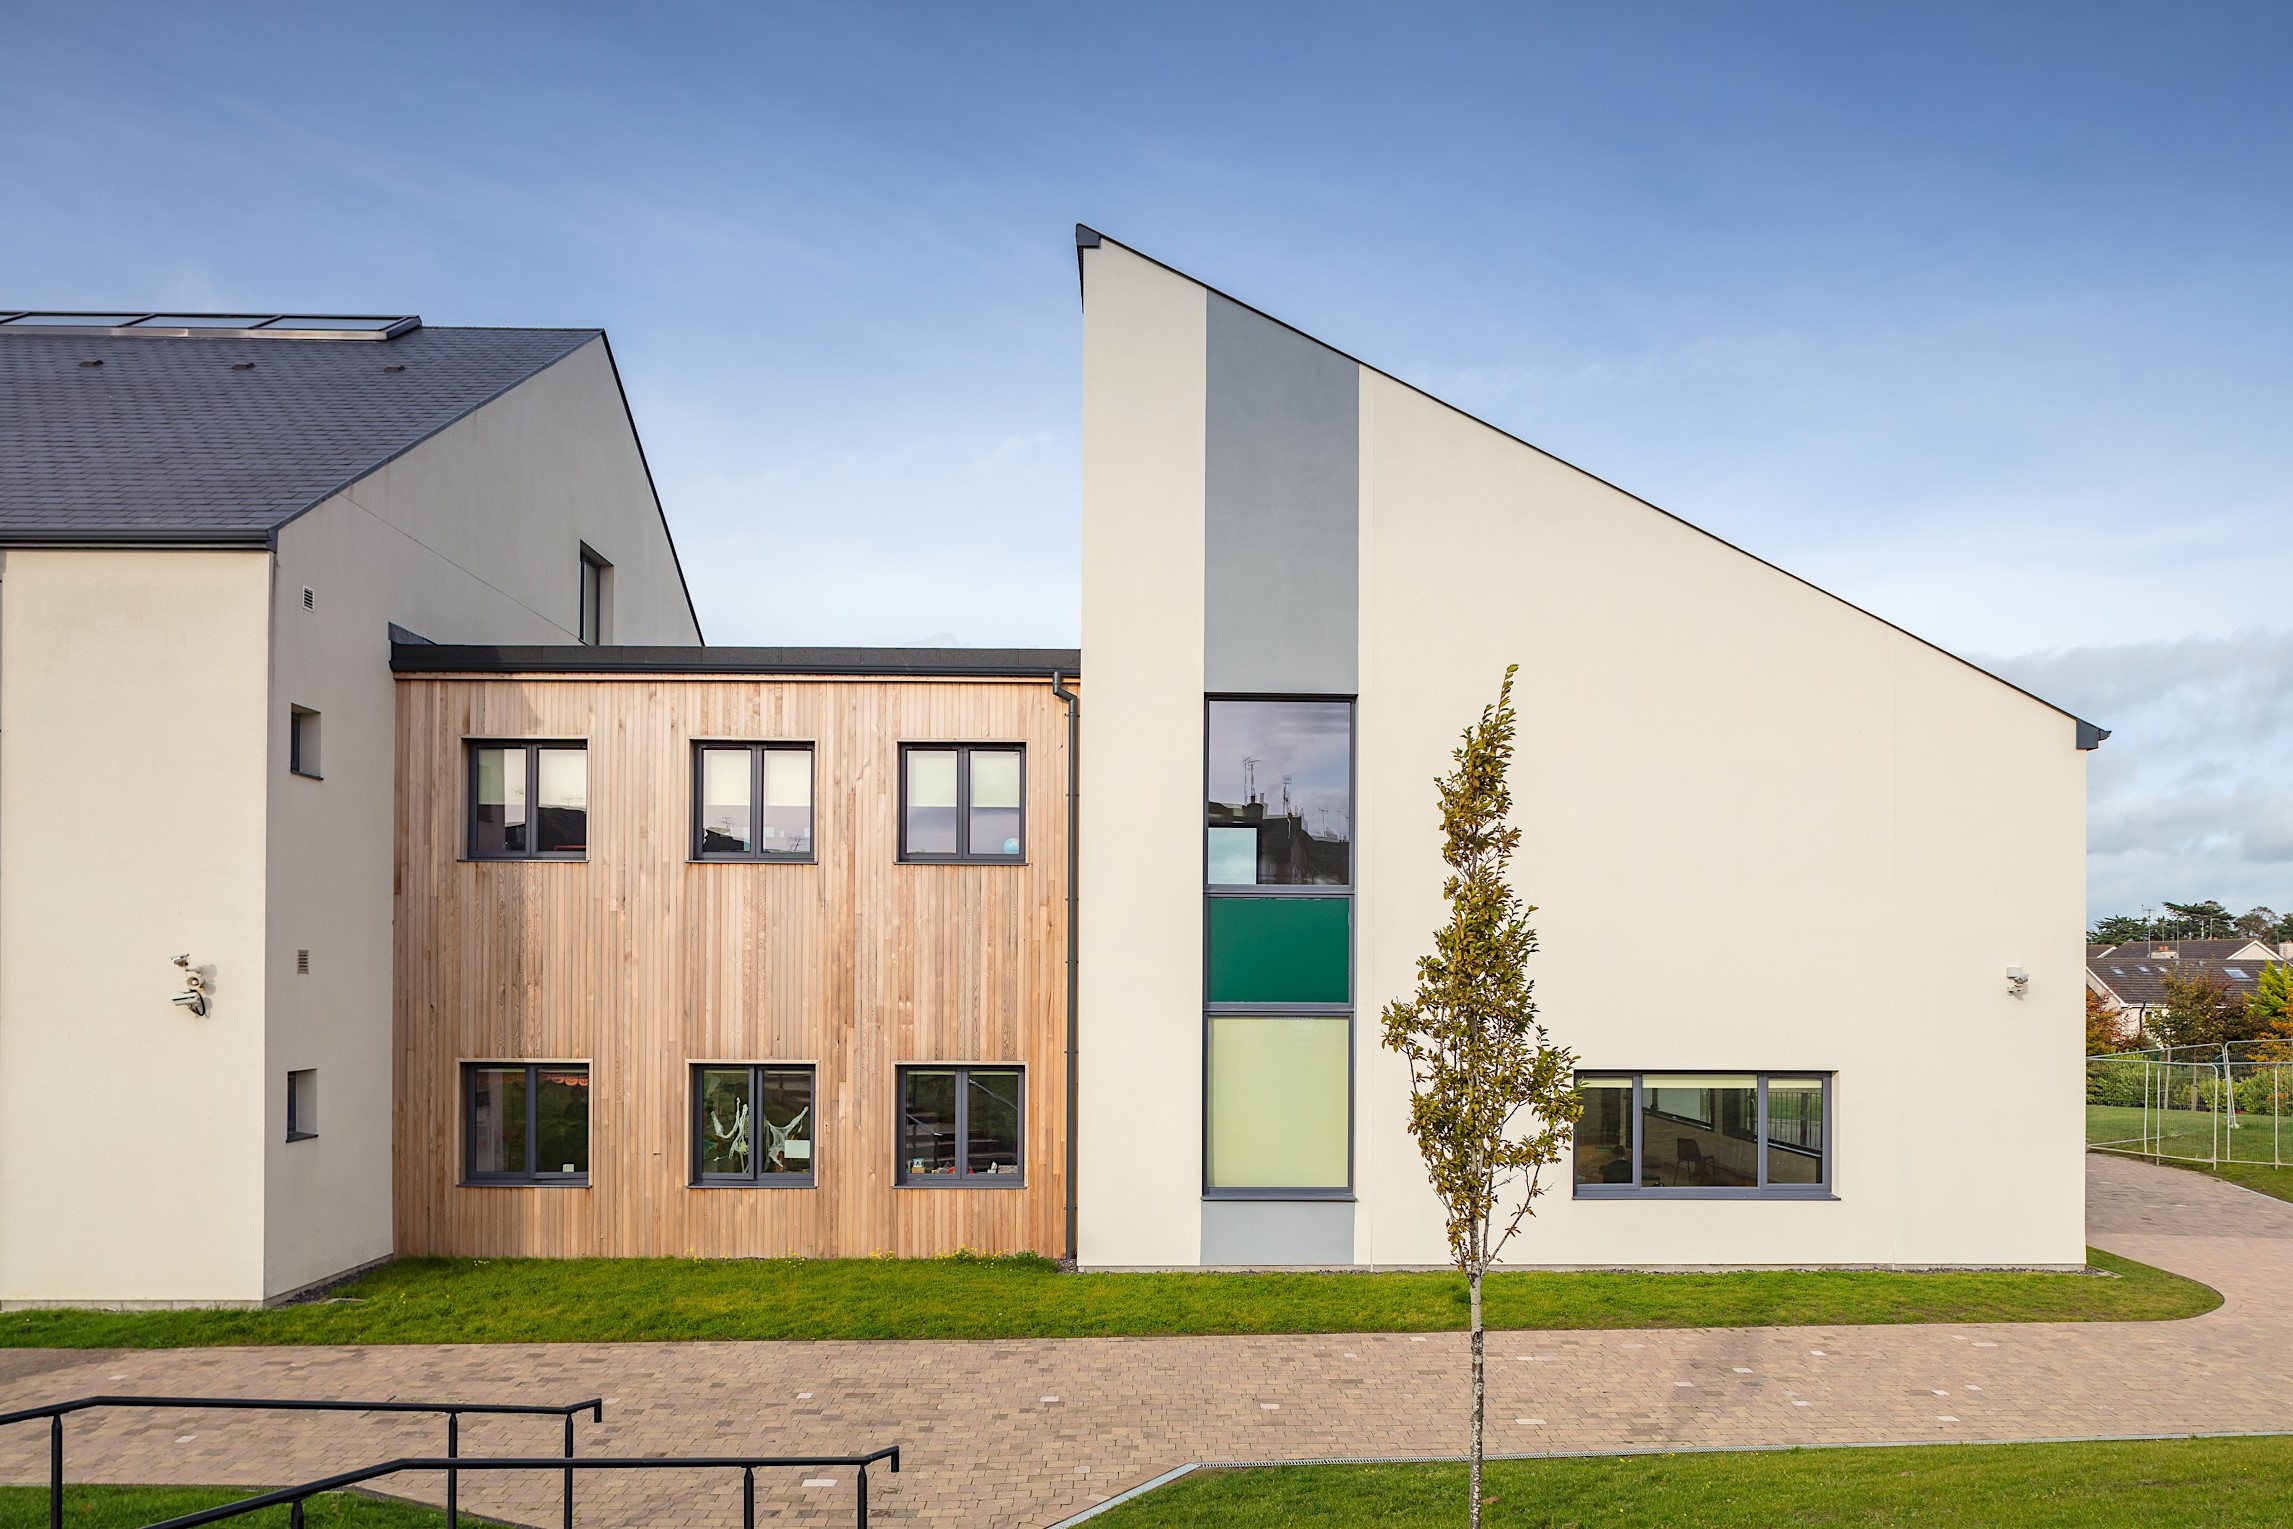 Extension to St. Mary’s Parish Primary School complete